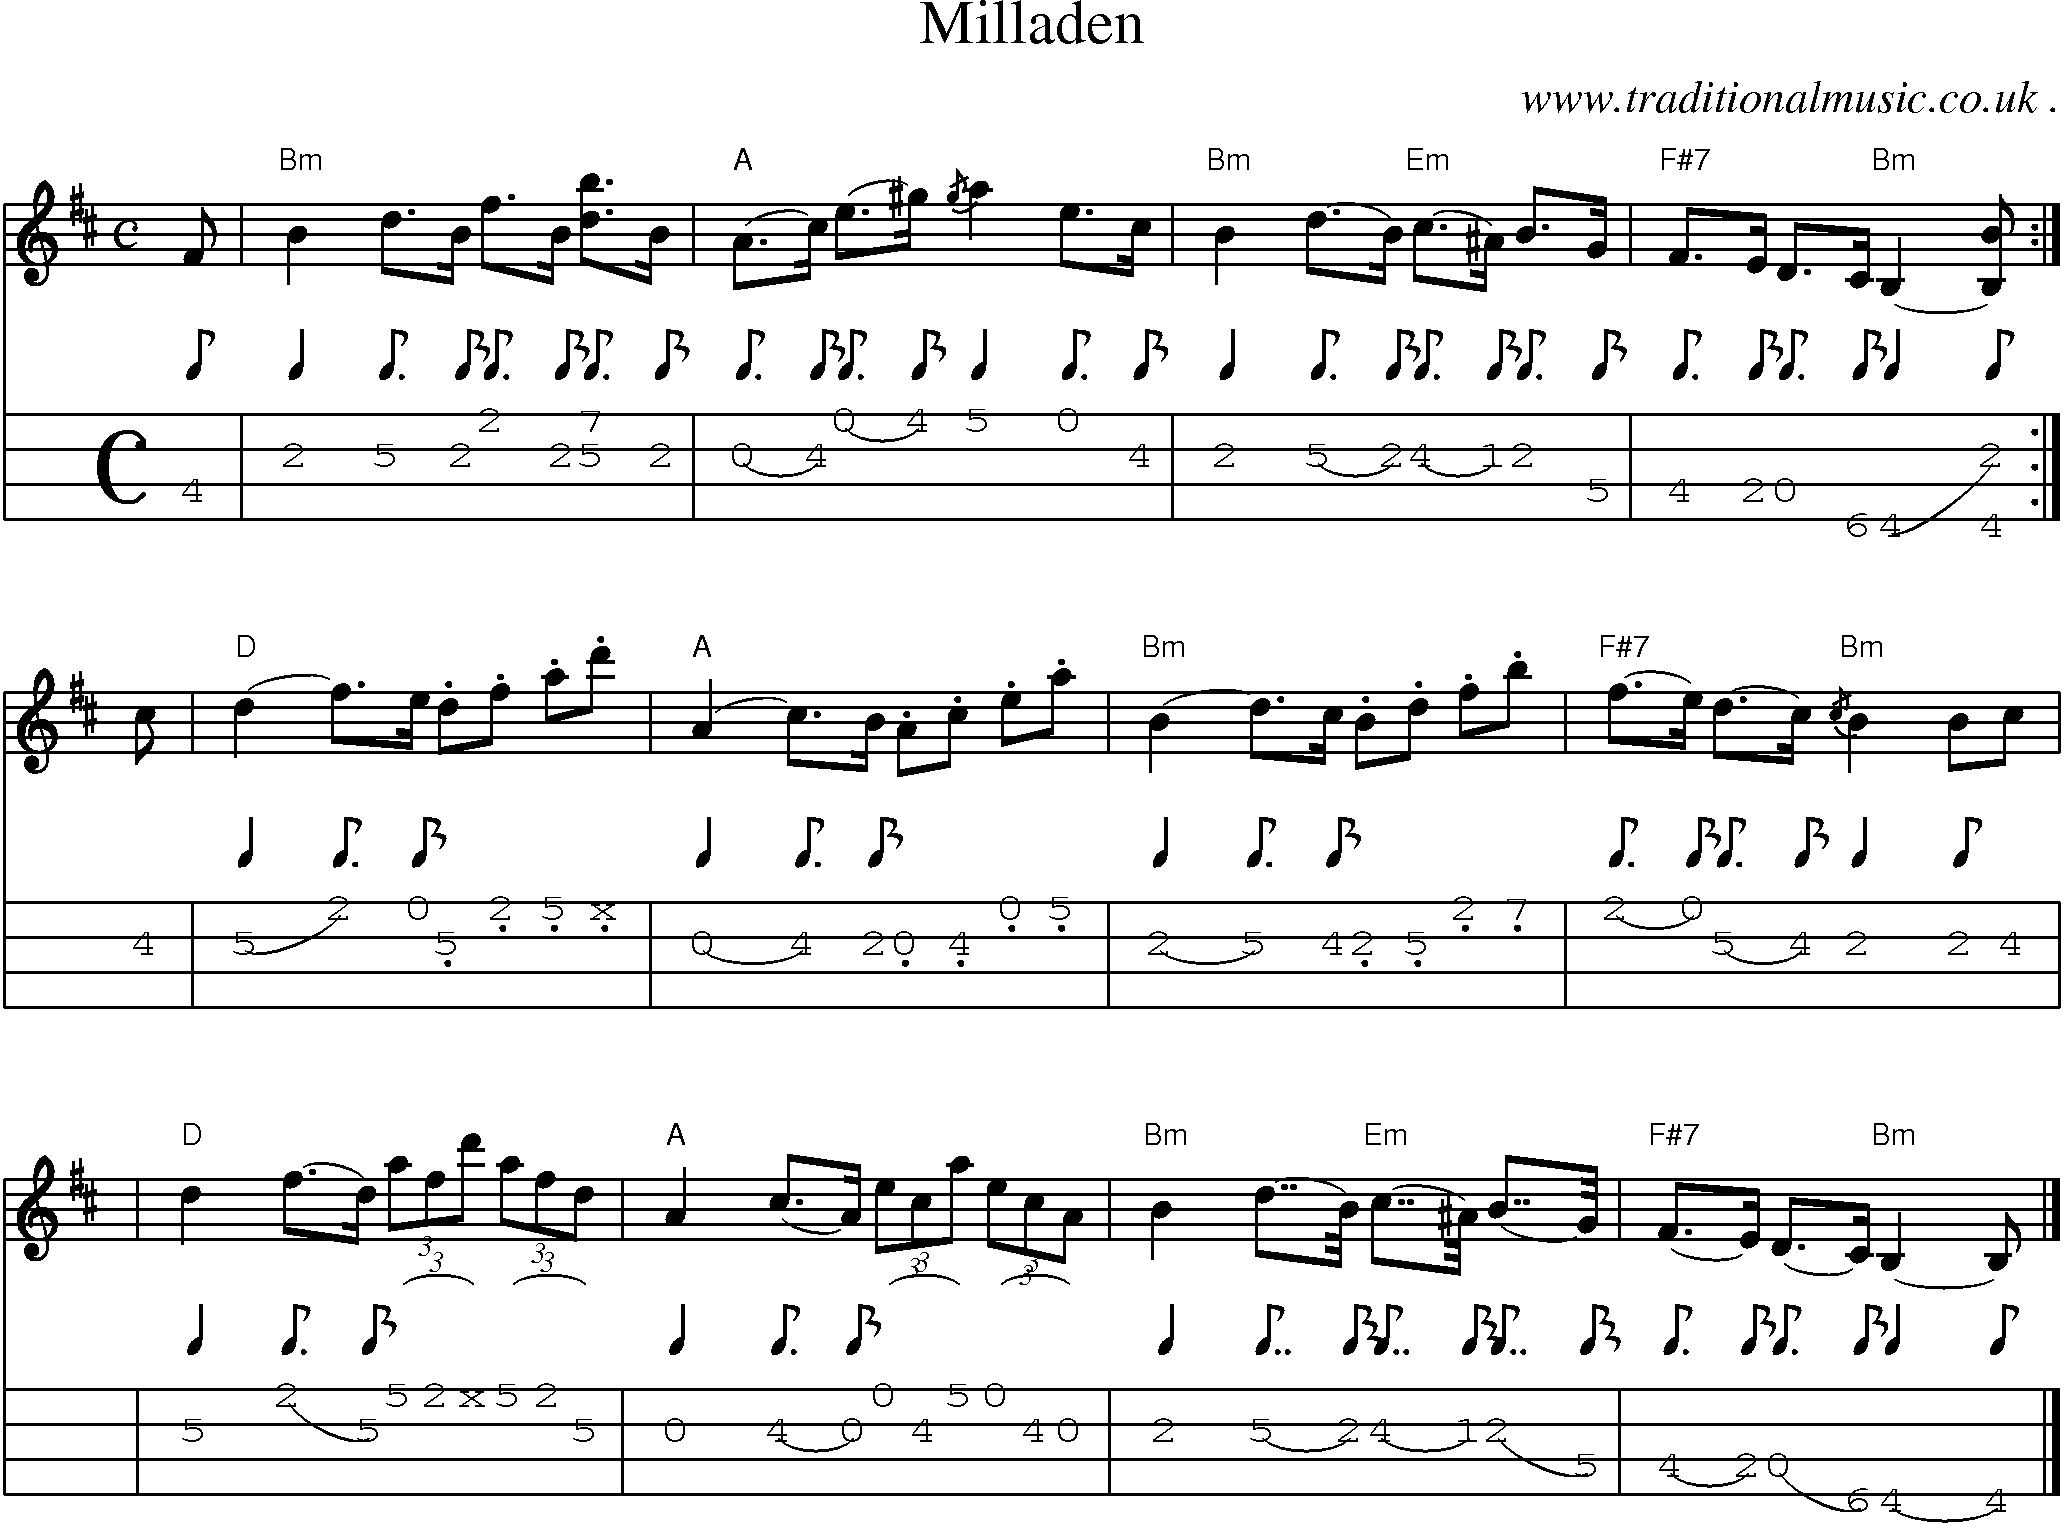 Sheet-music  score, Chords and Mandolin Tabs for Milladen